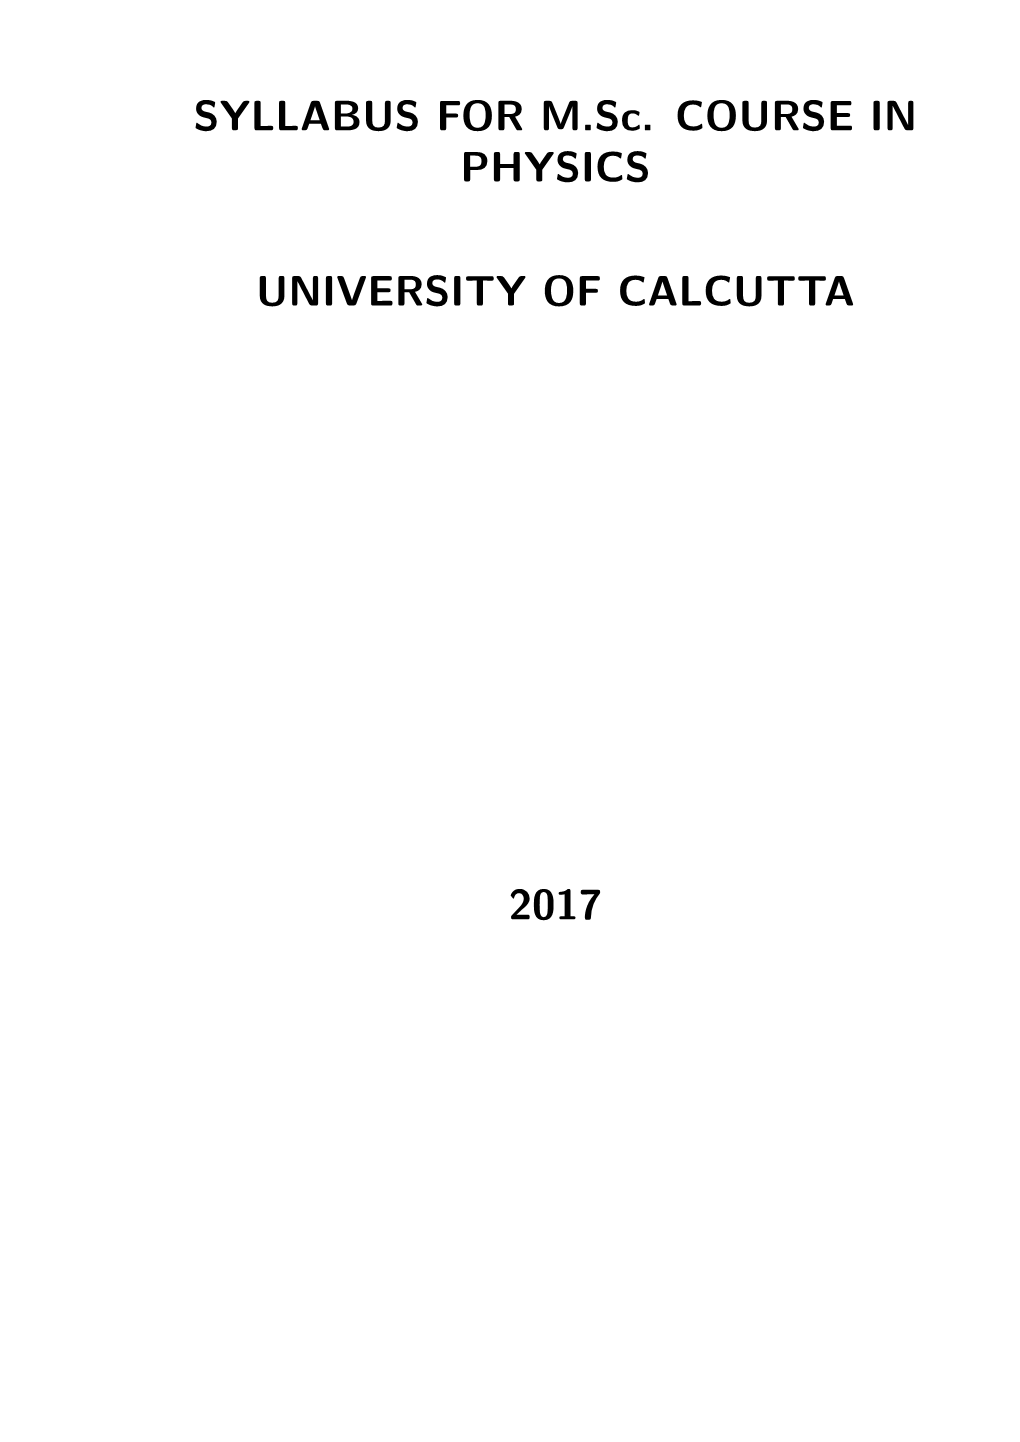 SYLLABUS for M.Sc. COURSE in PHYSICS UNIVERSITY OF